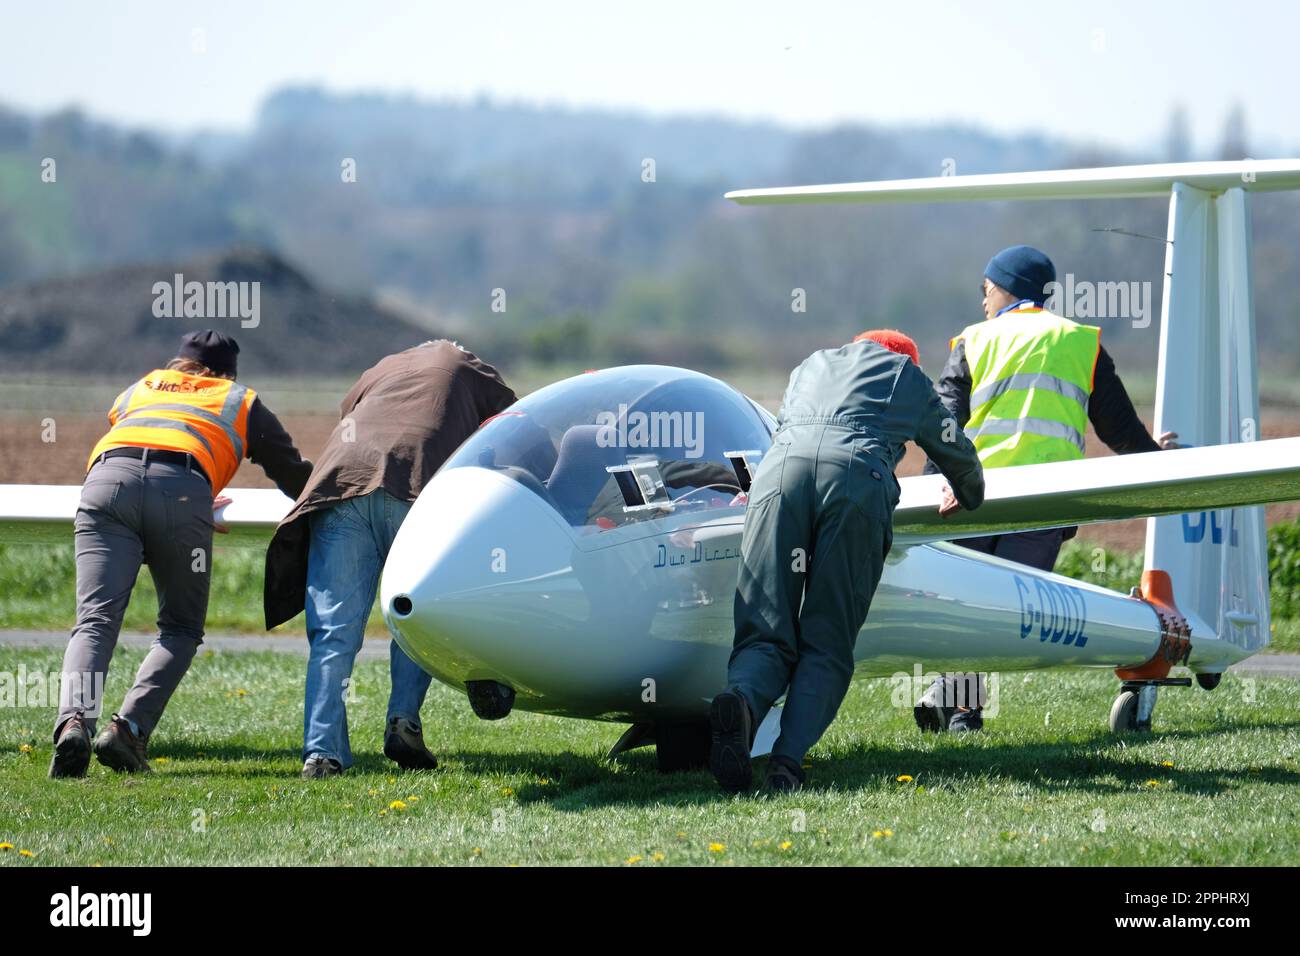 Team work as members of a gliding club move a glider across a grass airfield in the UK Stock Photo